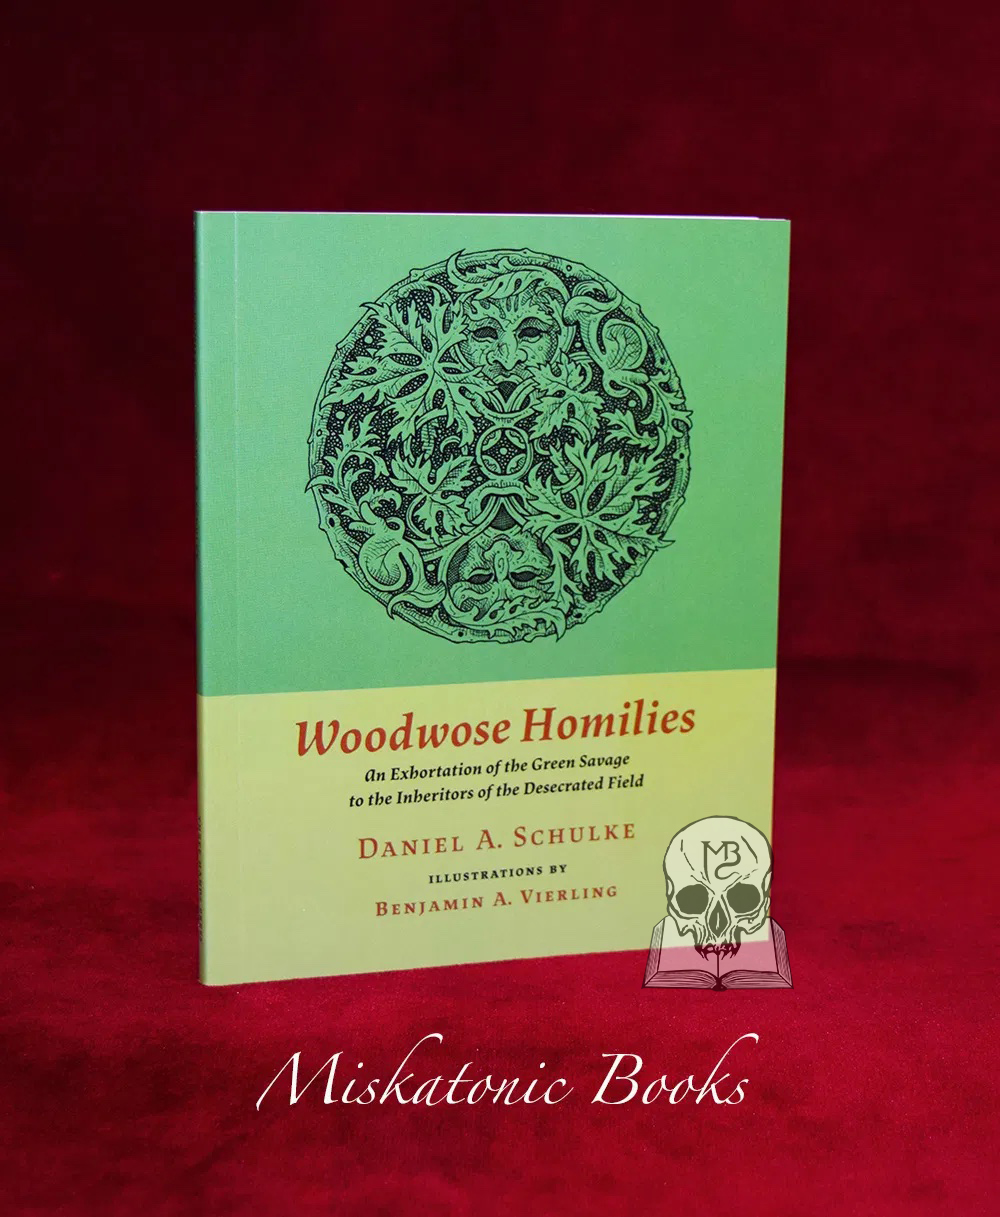 WOODWOSE HOMILIES by Daniel Schulke - Paperback